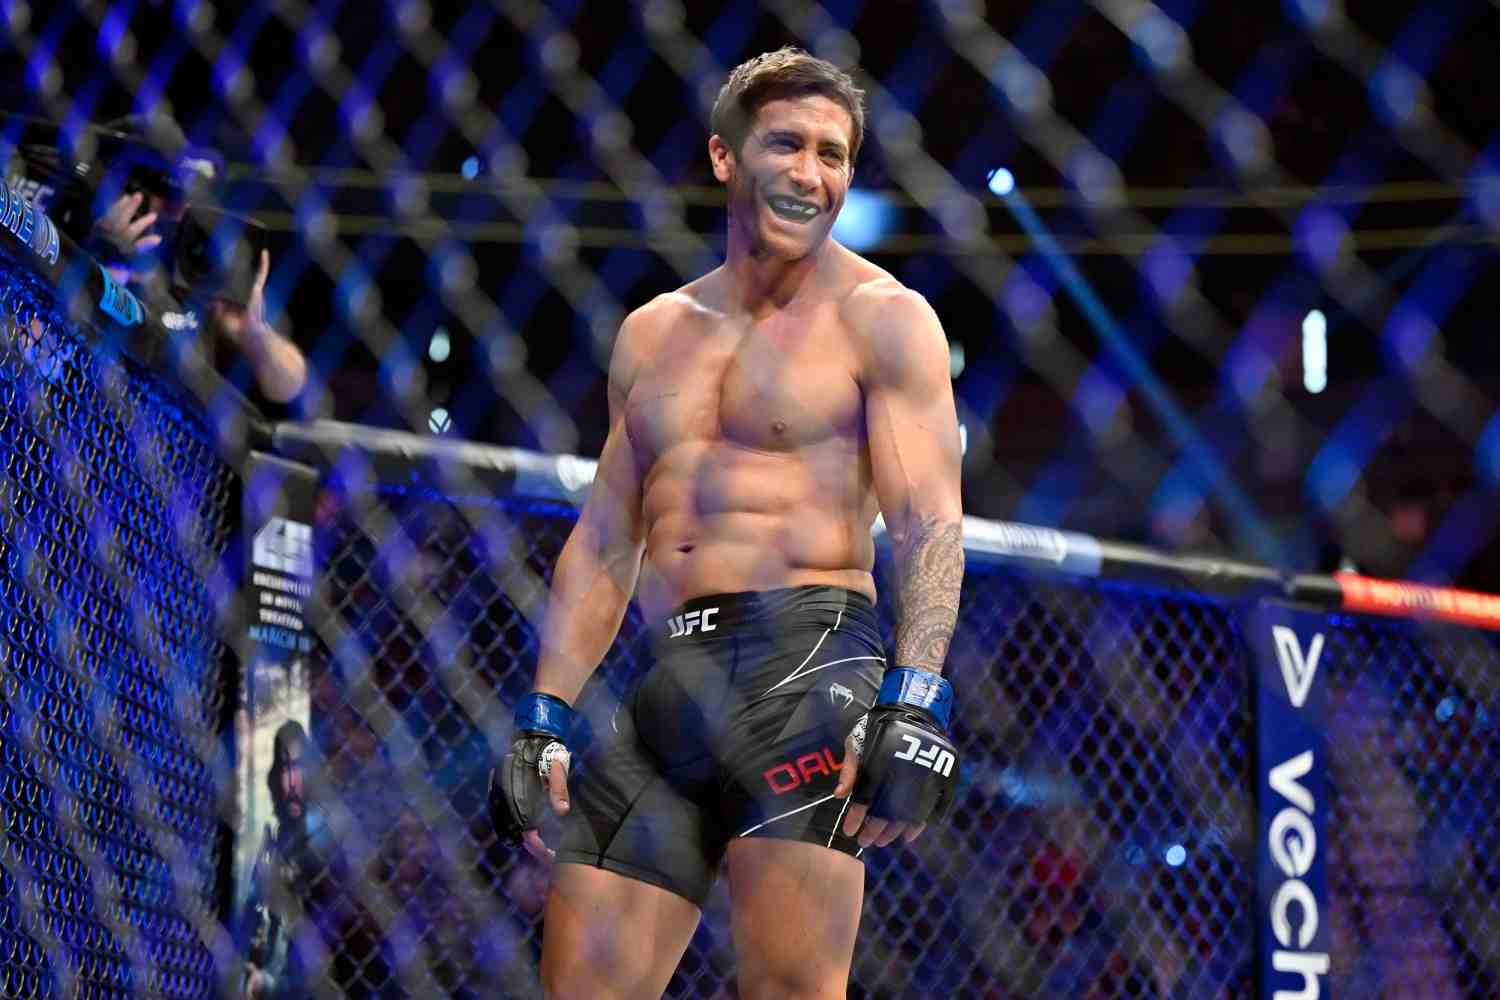 Dive into the "Jake Gyllenhaal UFC" phenomenon. Is it method acting mastery or a well-timed publicity stunt? Find out how he punches above the Hollywood hype!